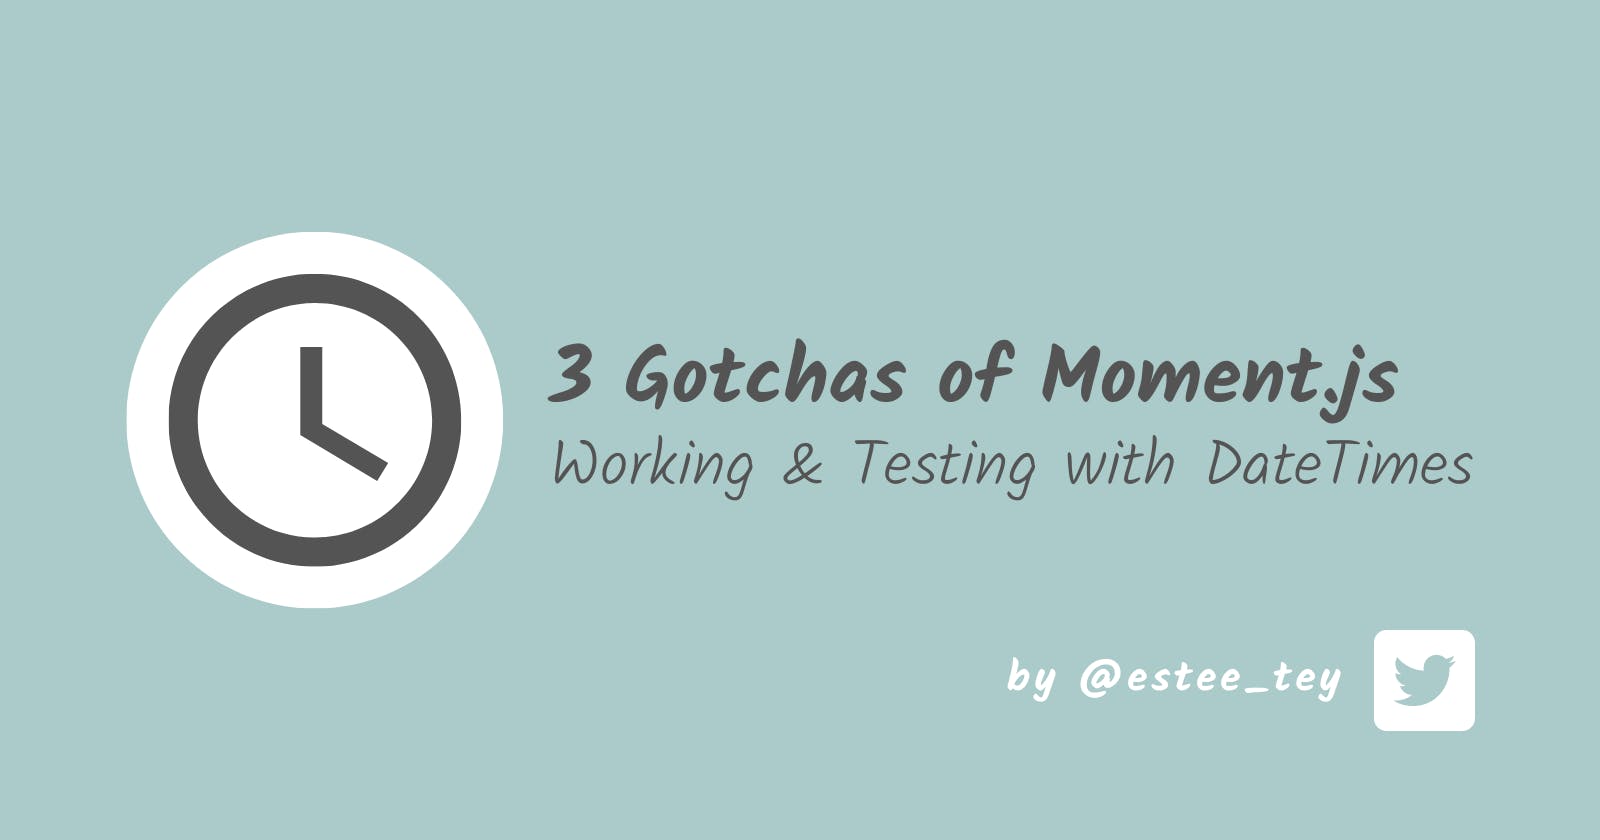 A Strange Moment.js — 3 Gotchas for Working & Testing with Datetimes